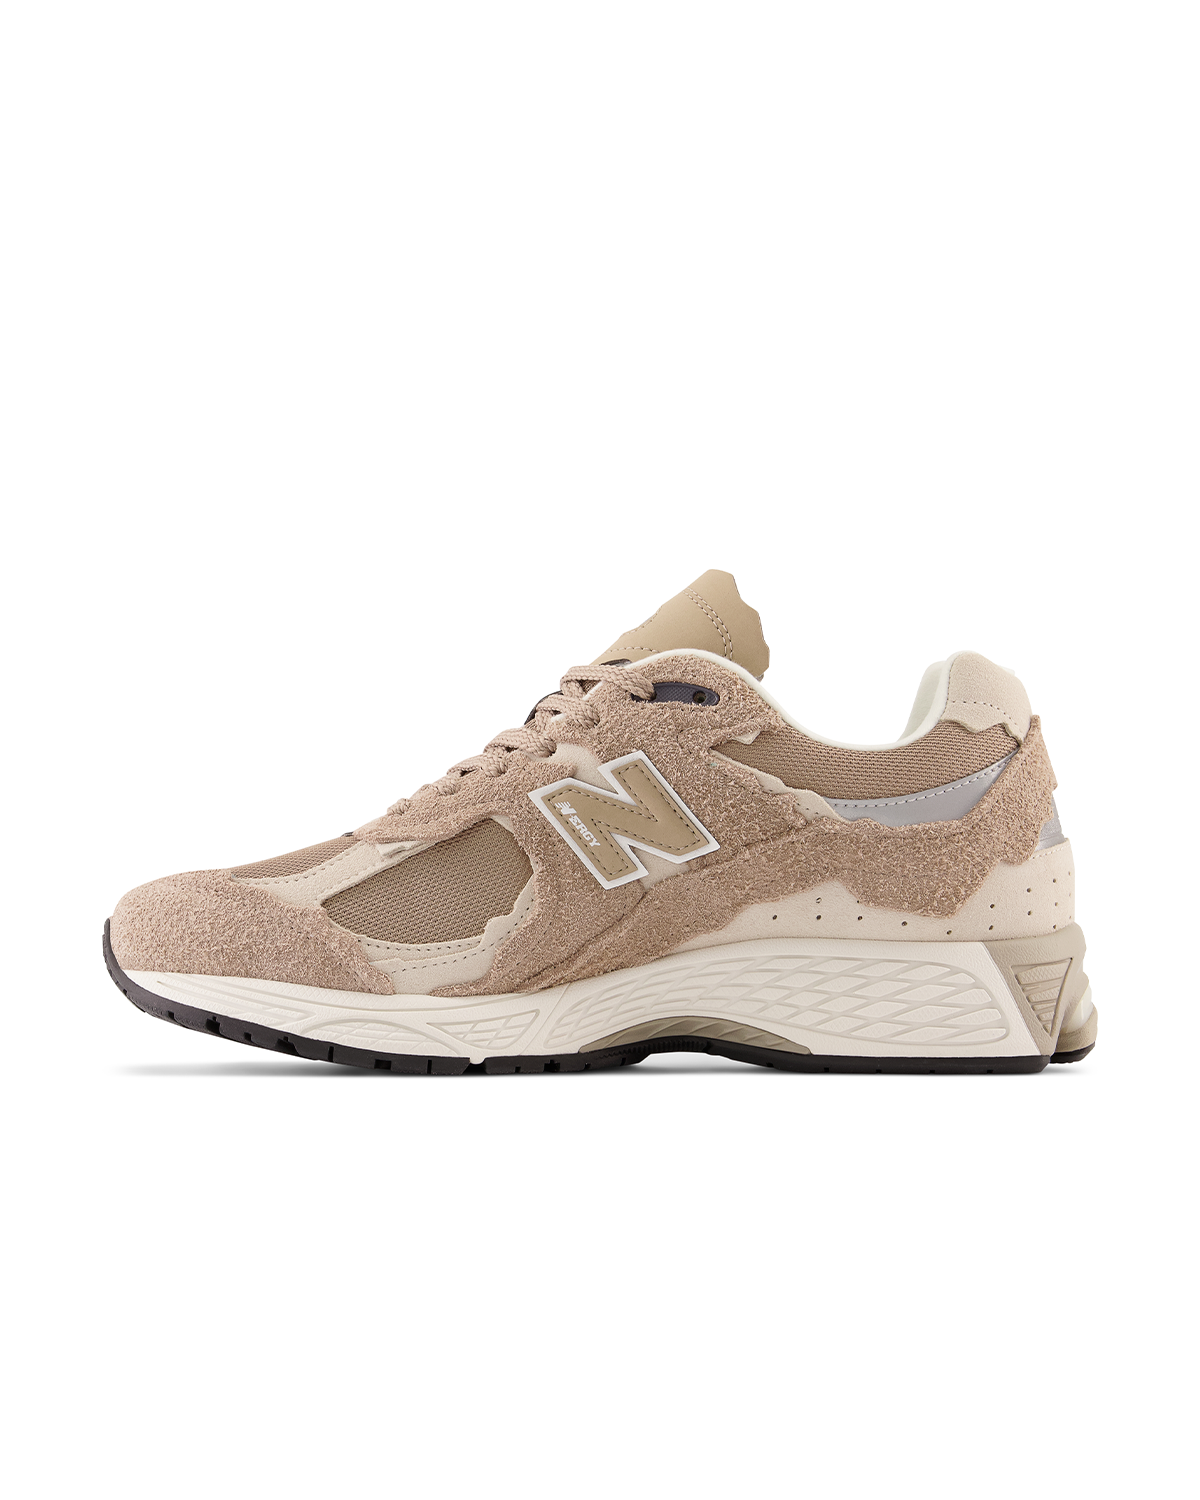 New Balance 2002R Driftwood Shoes Sneakers Unisex